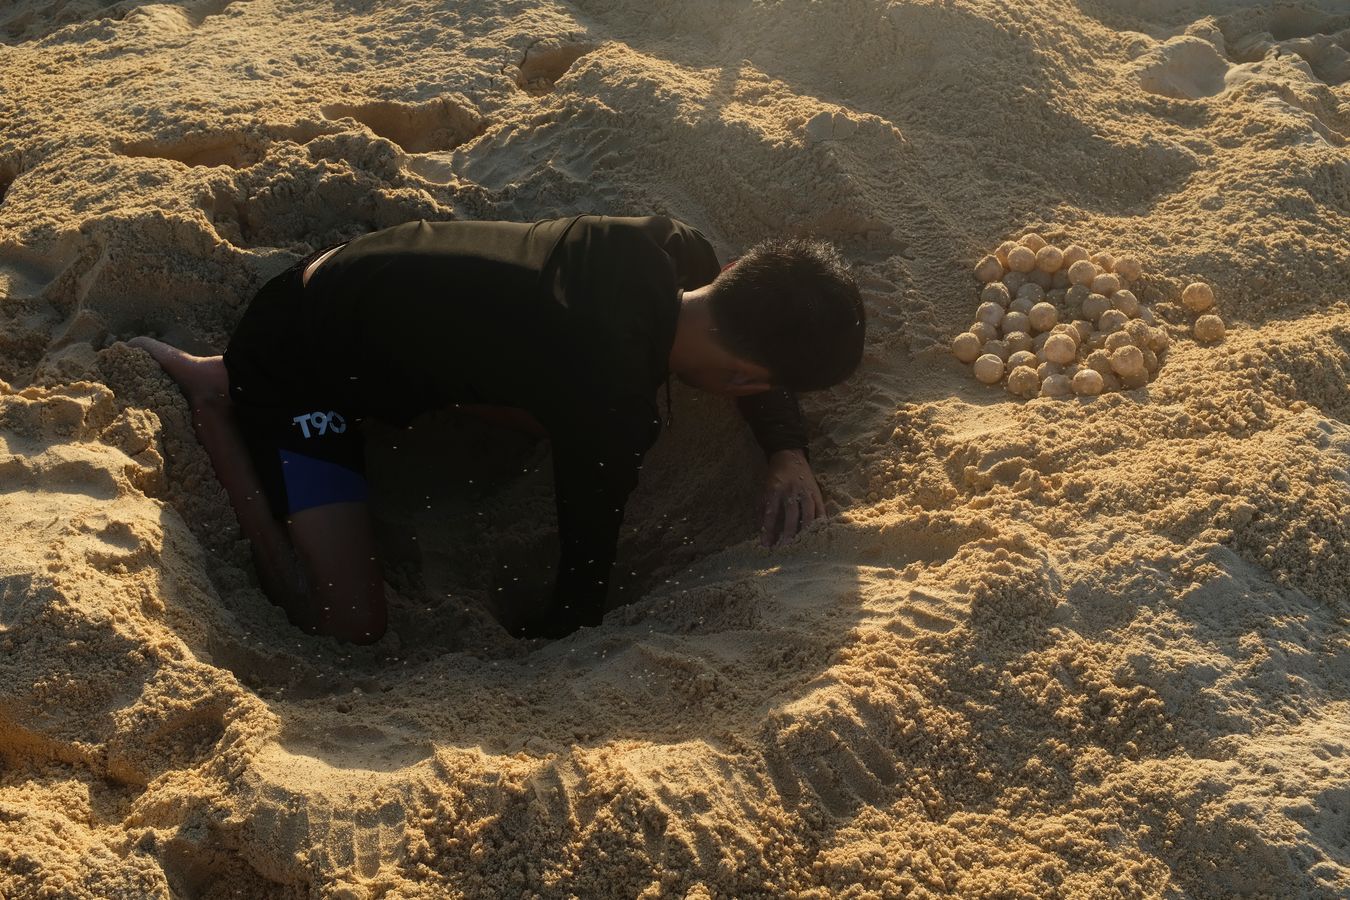 Ranger Aldrin removes sea turtle eggs from its nest bothered by numerous flies.